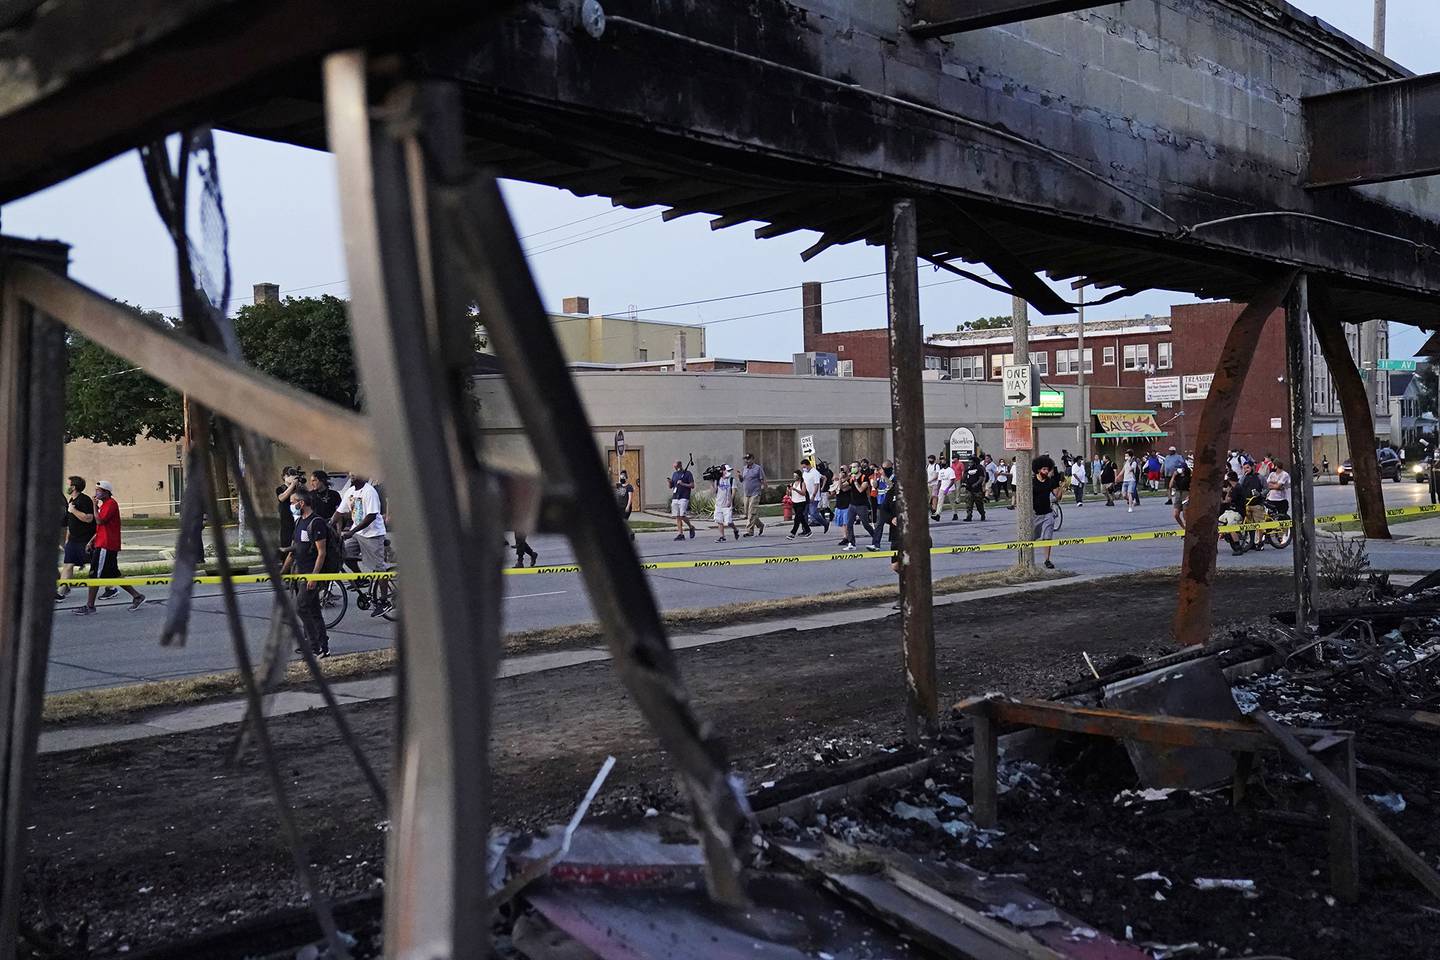 Protesters march past a burned out building damaged in protests against the Sunday police shooting of Jacob Blake in Kenosha, Wis., Wednesday, Aug. 26, 2020.